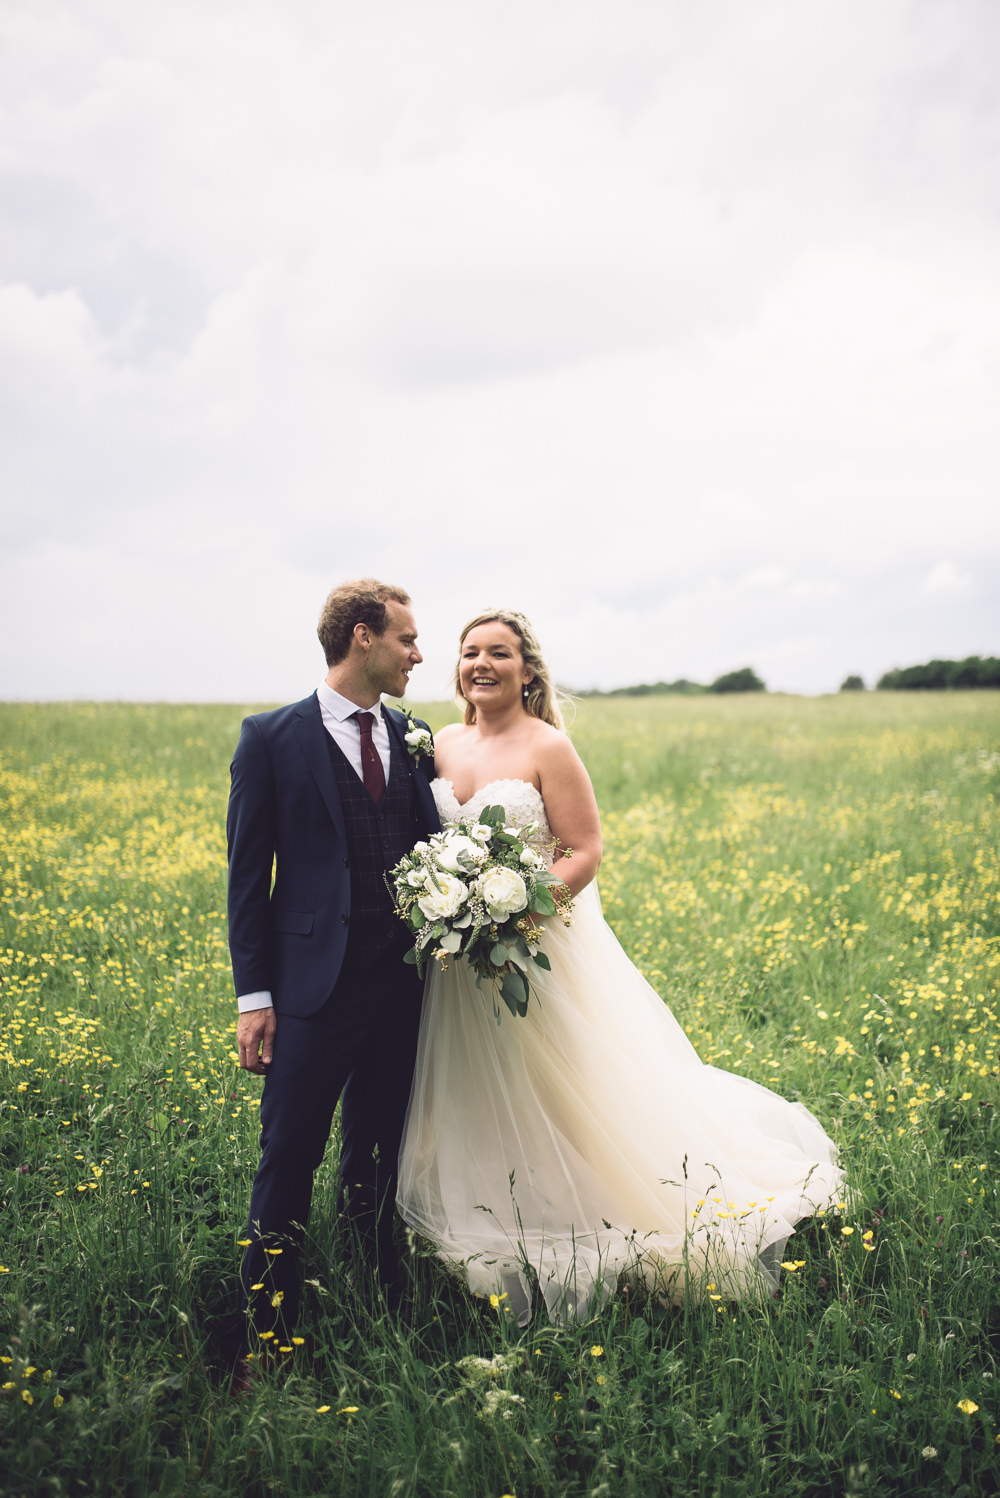 Beautiful Botanical Country Barn Wedding Filled With Greenery